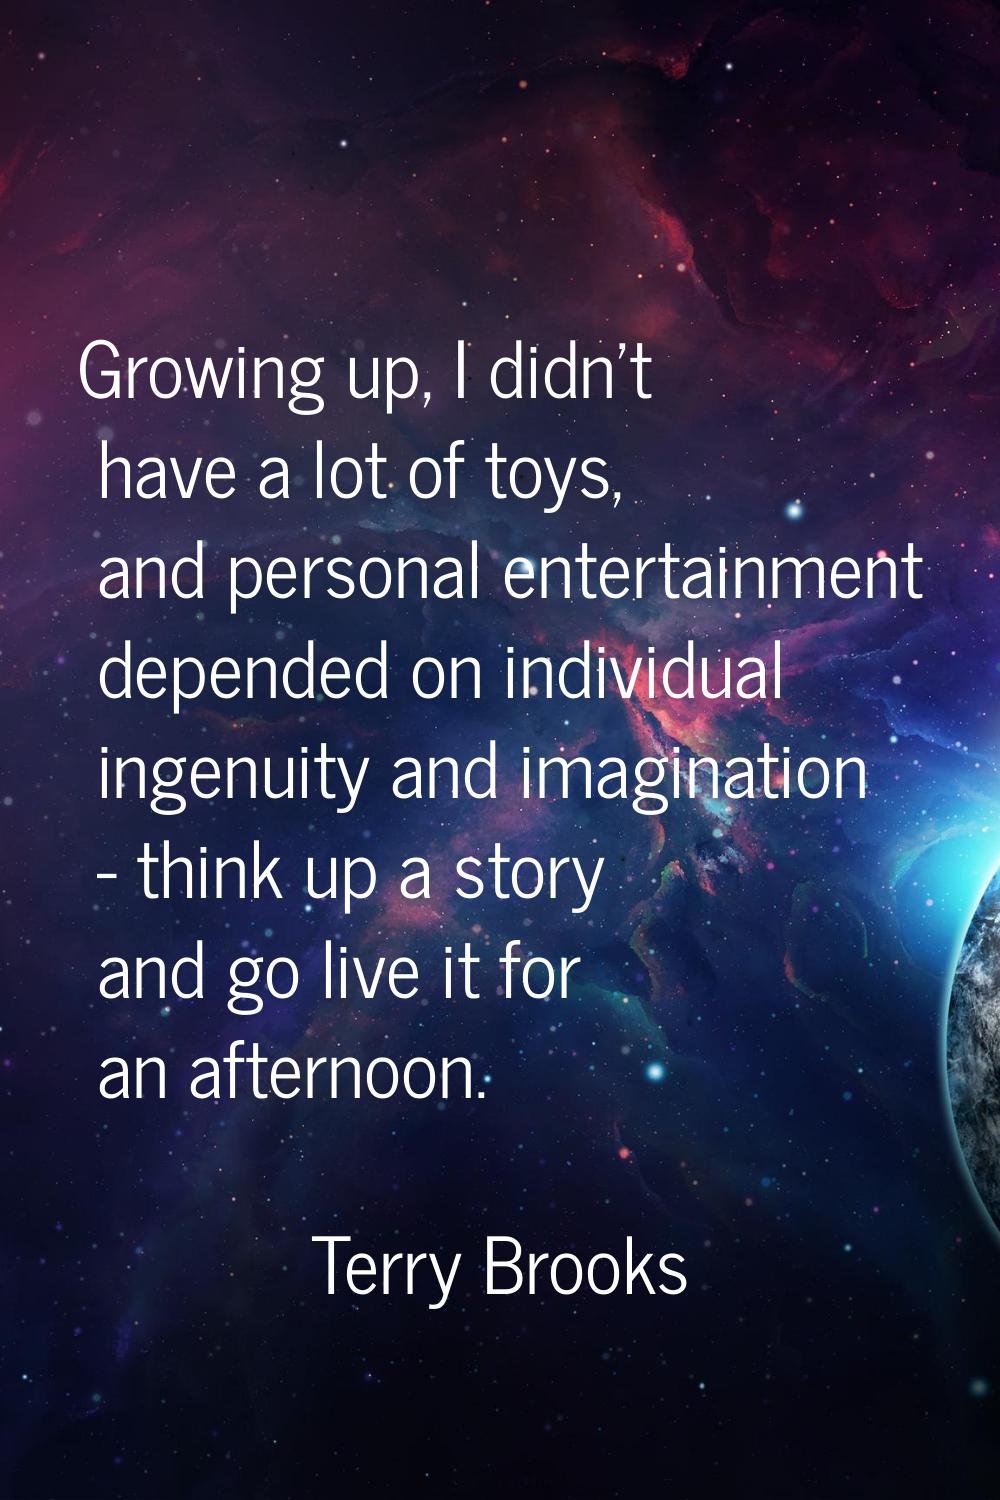 Growing up, I didn't have a lot of toys, and personal entertainment depended on individual ingenuit